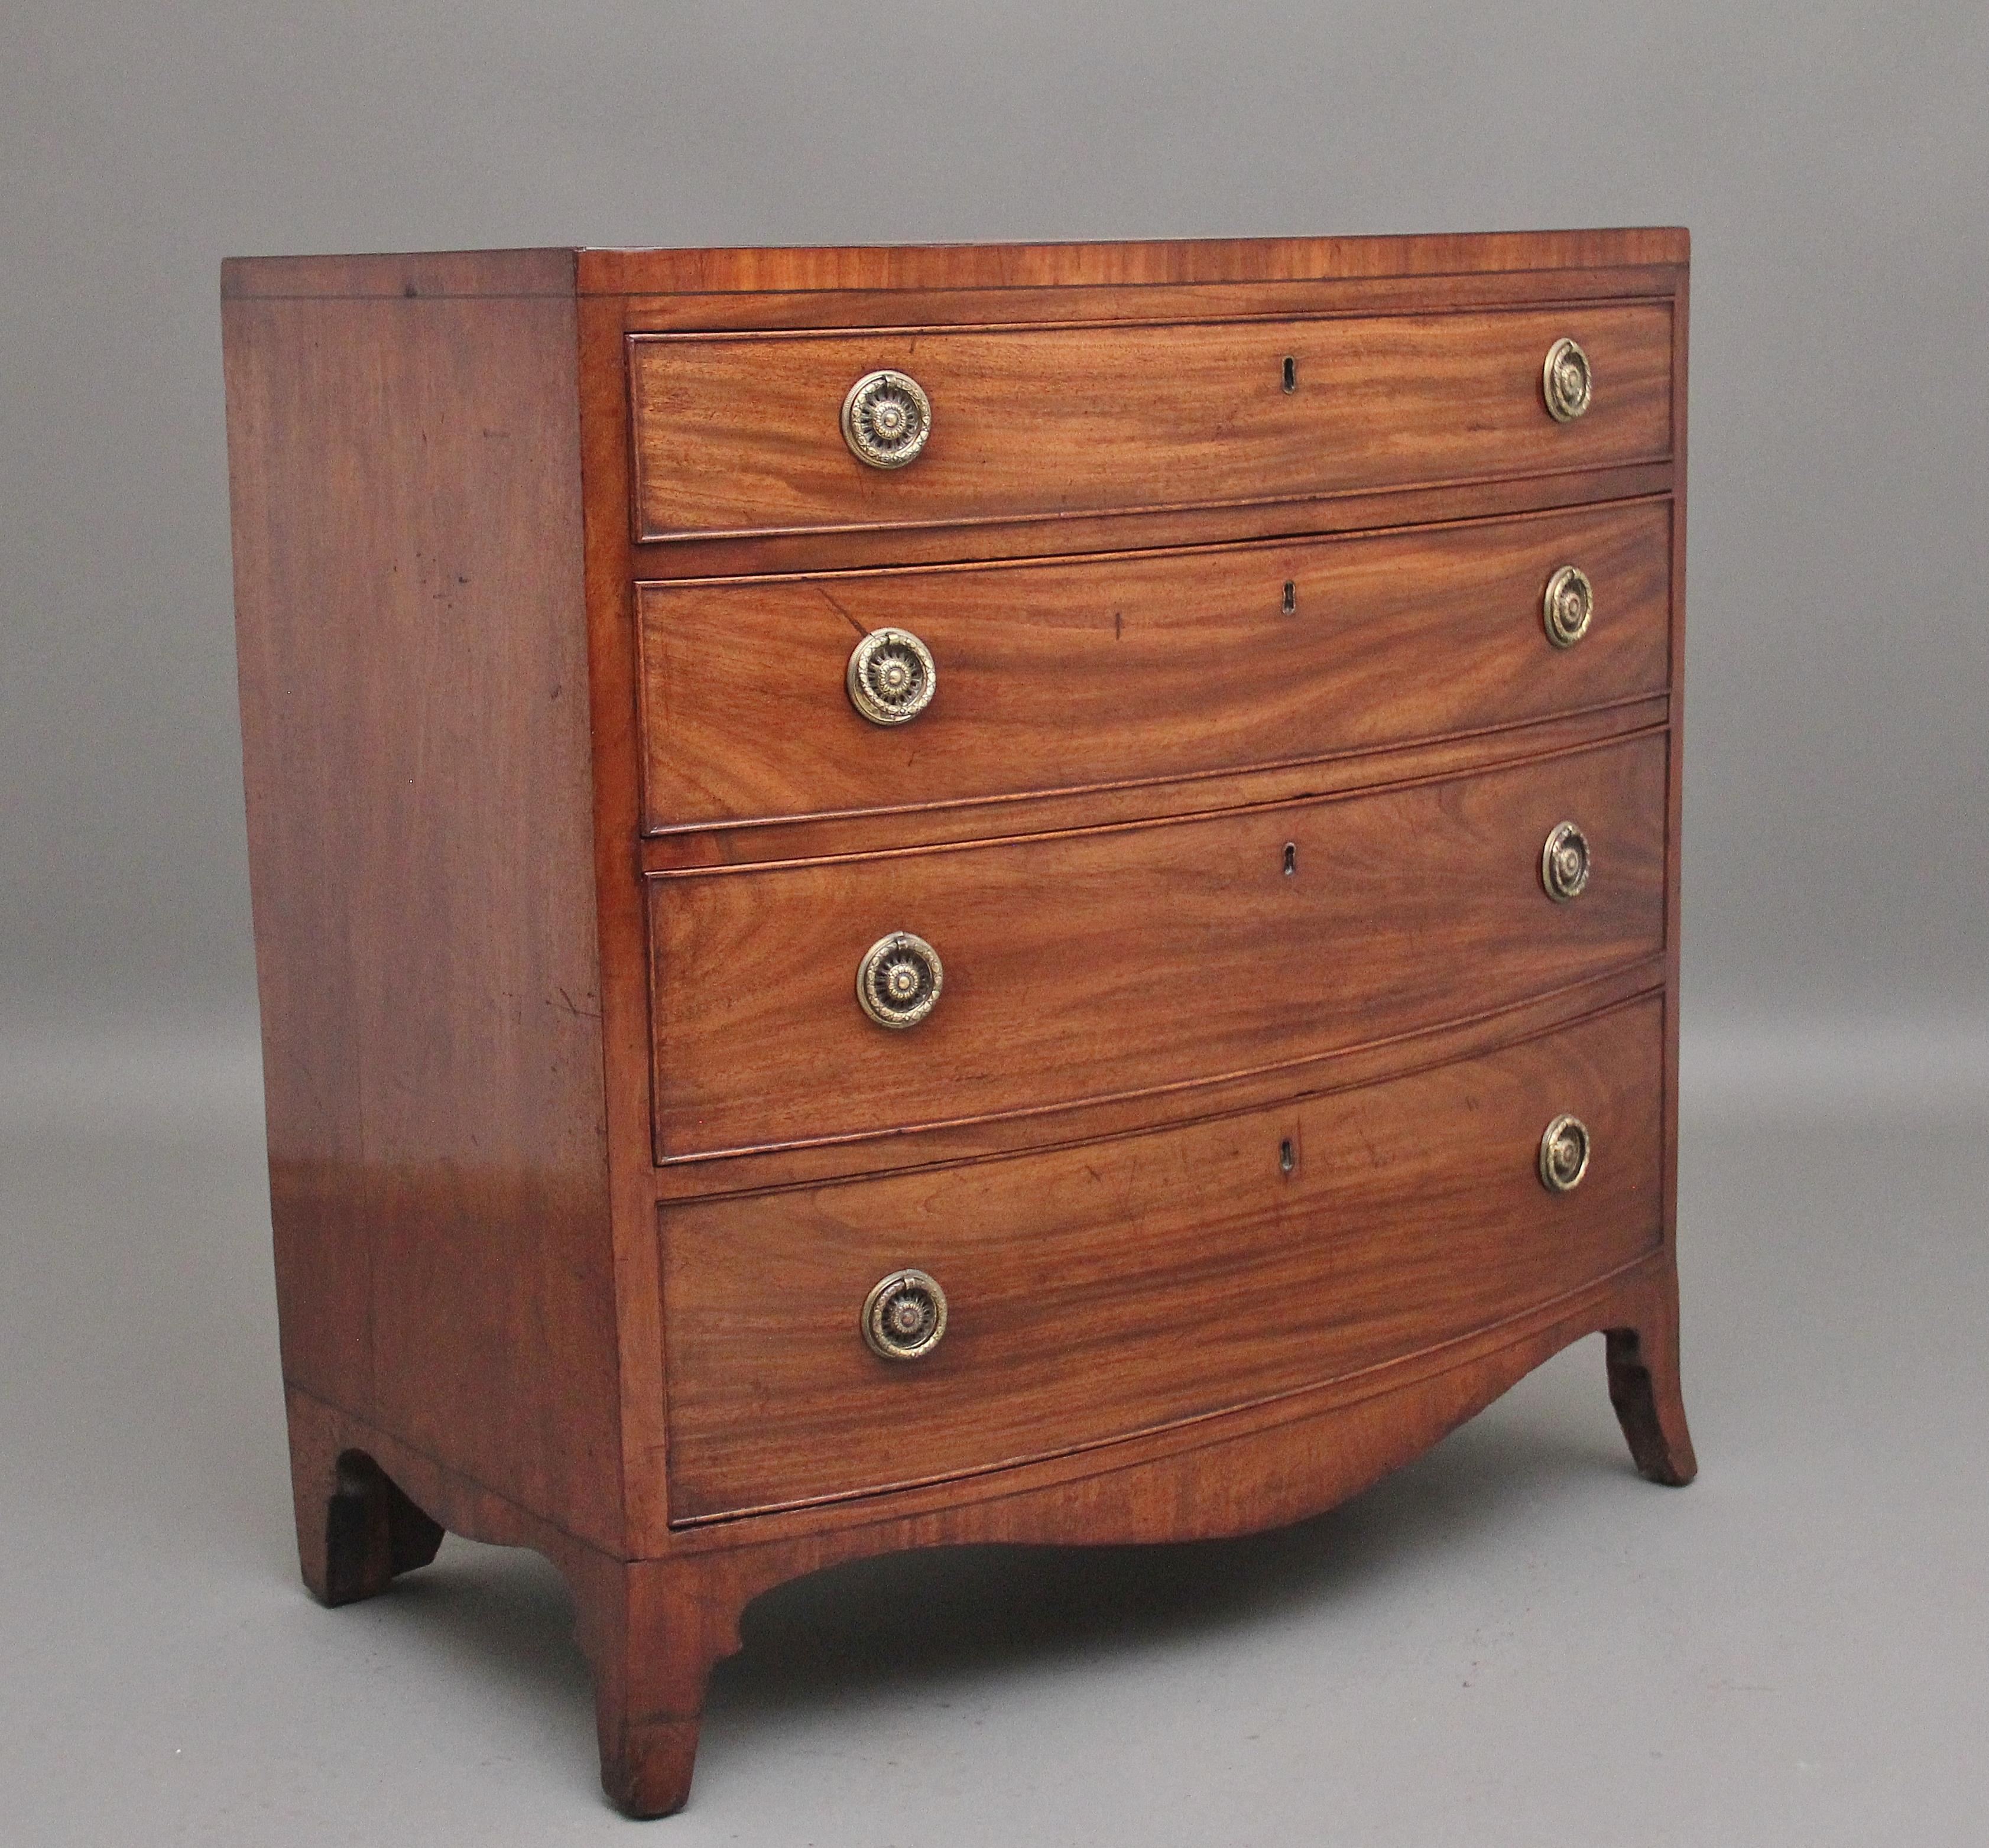 Early 19th Century mahogany bowfront chest of drawers of nice proportions, having a lovely figured and crossbanded top above a selection of four long oak lined graduated drawers with pierced brass ring handles, having wonderful figuration on the